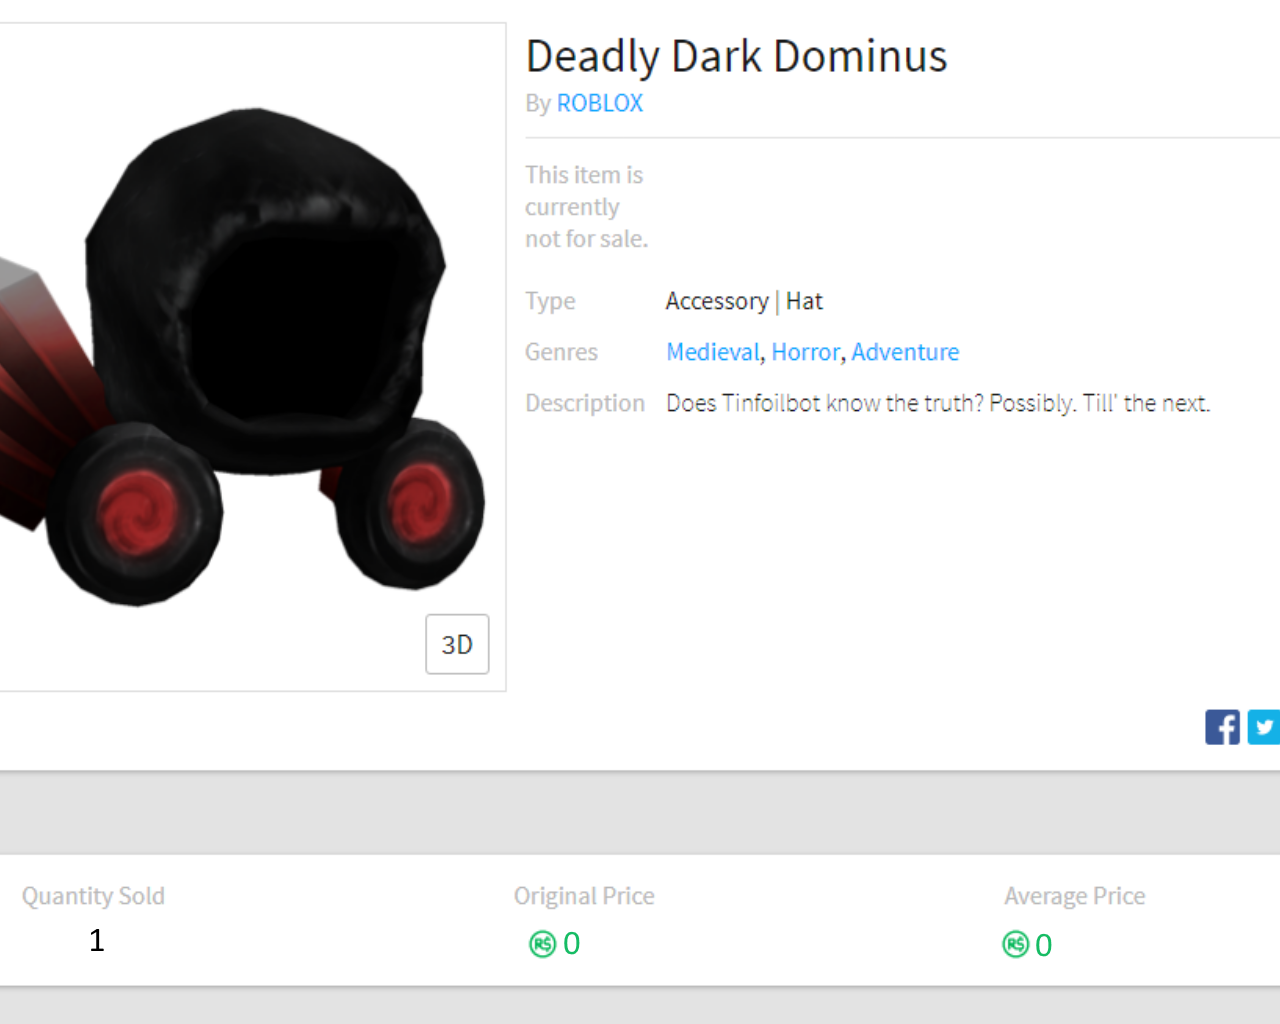 I've found the missing Dominus!?